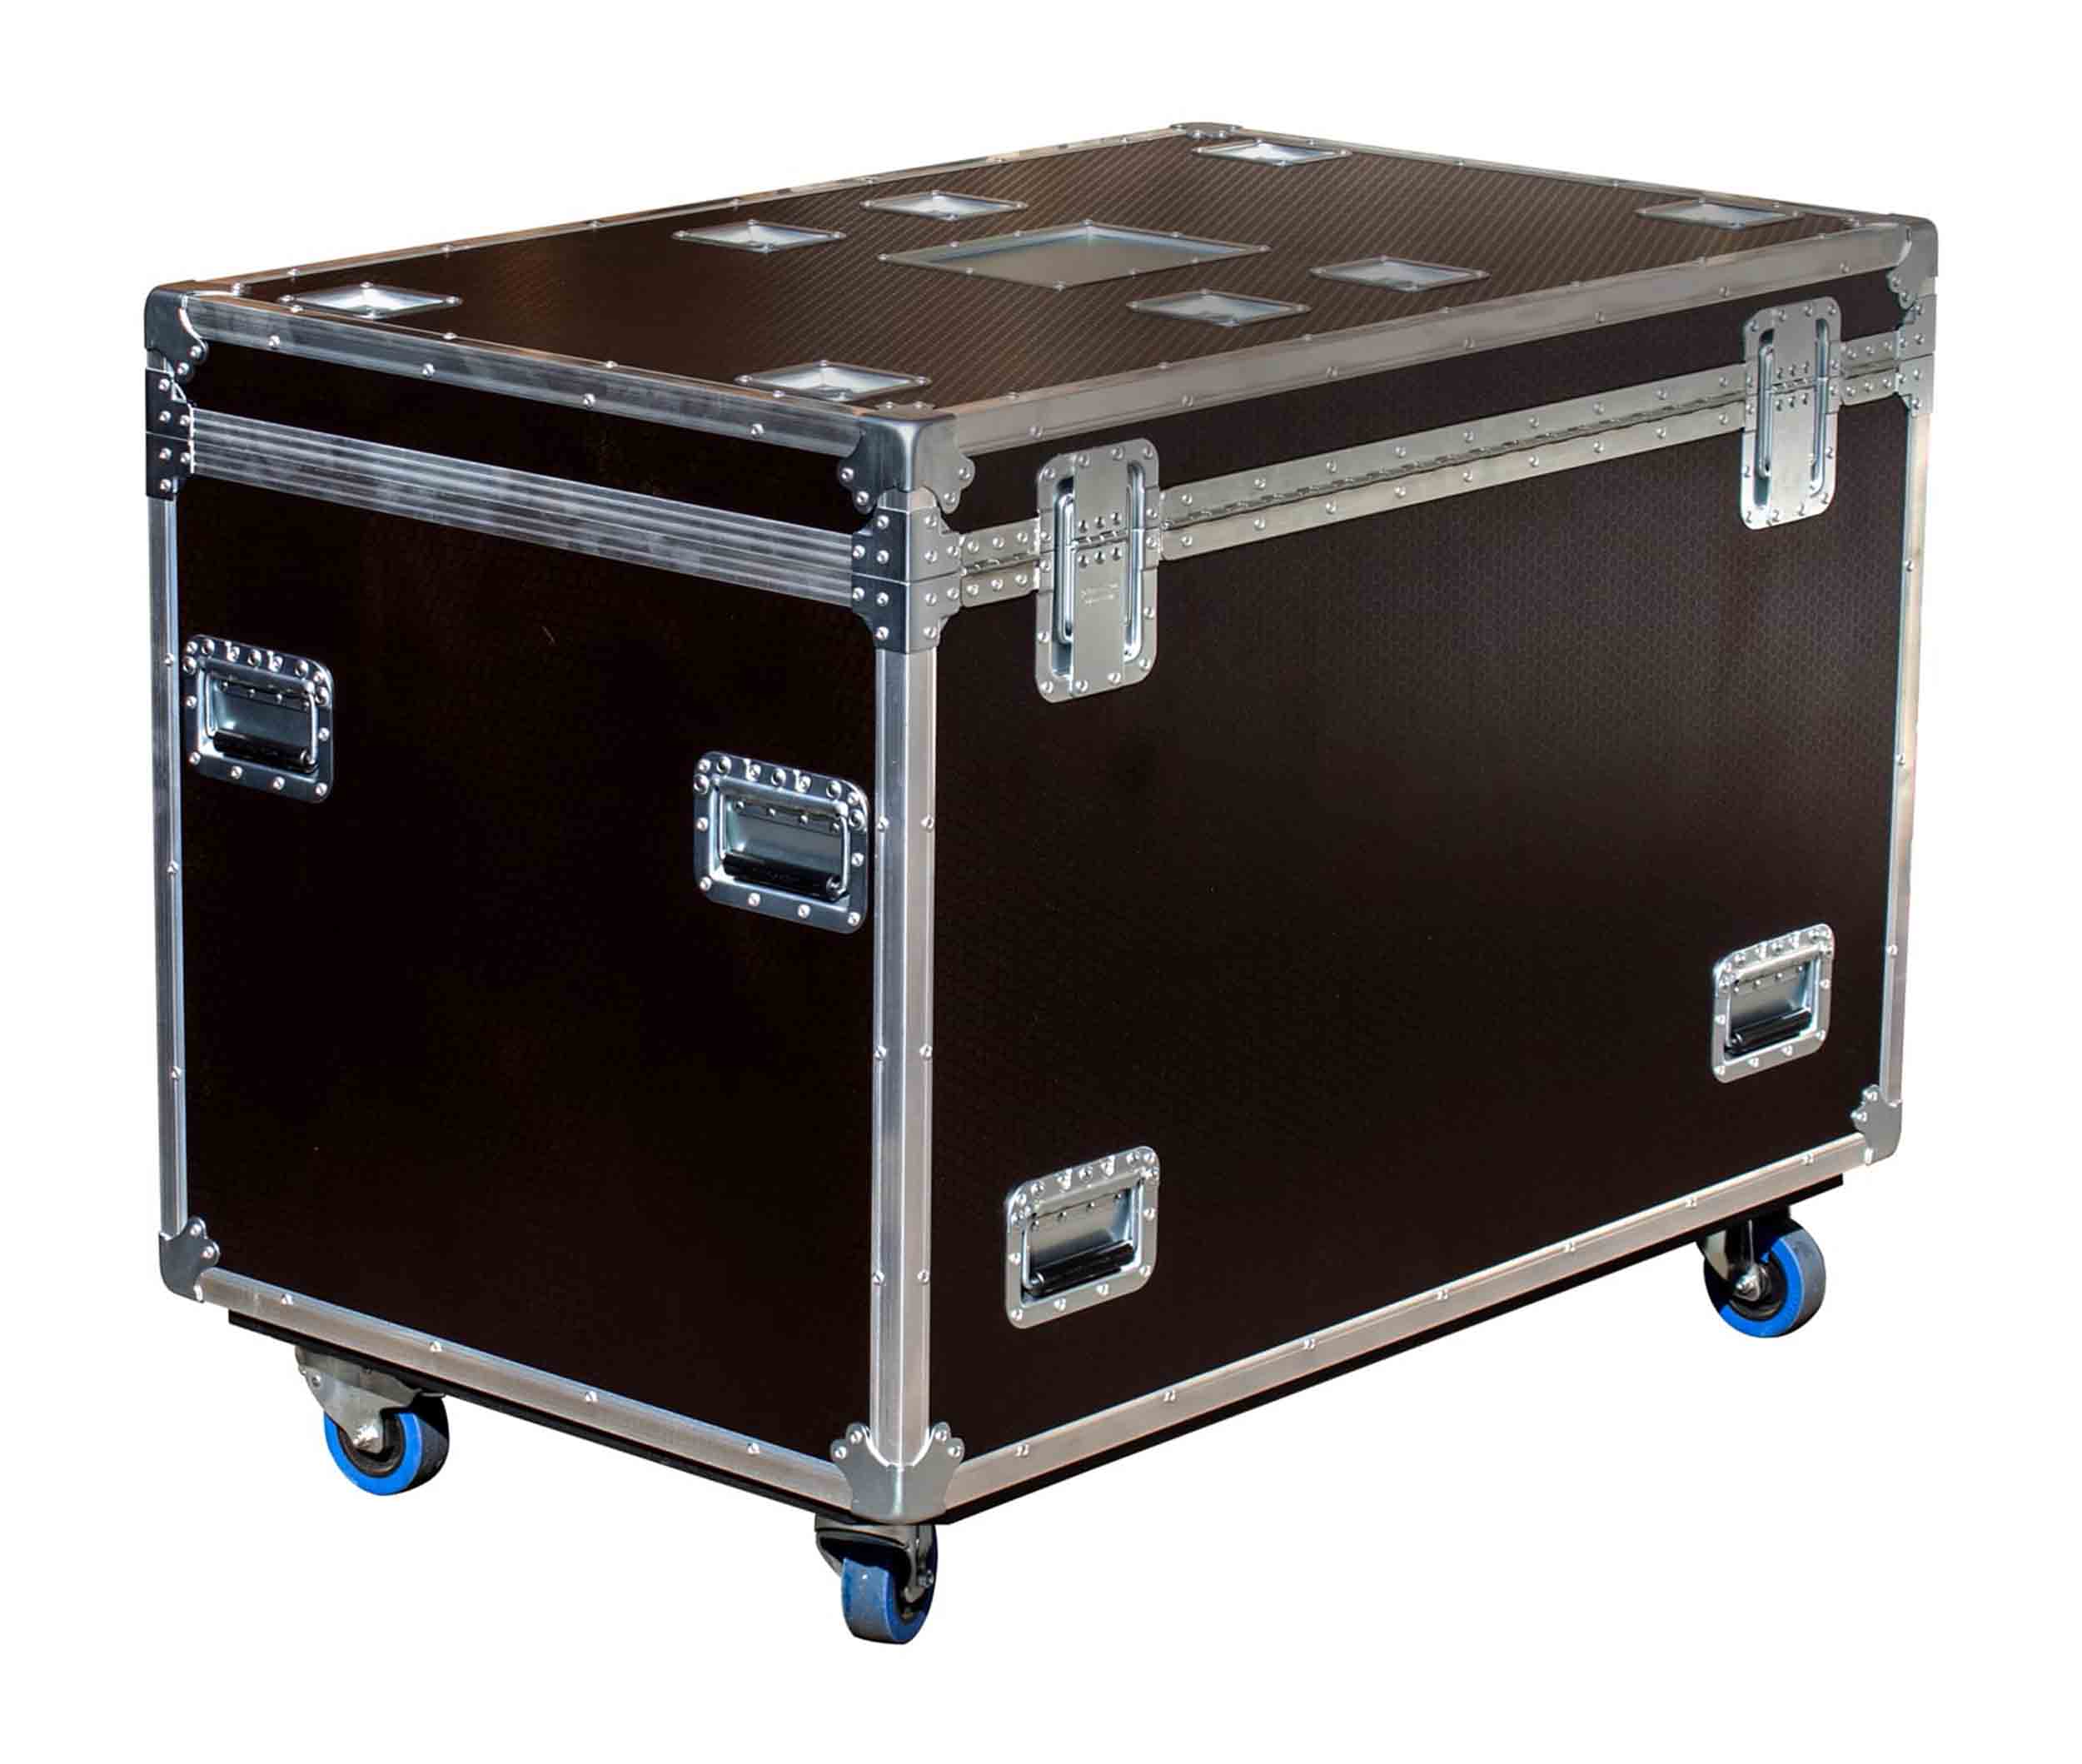 Odyssey OPT483036WBRN, Professional Brown Hex Board Utility Tour Trunk Case with Caster Wheels by Odyssey